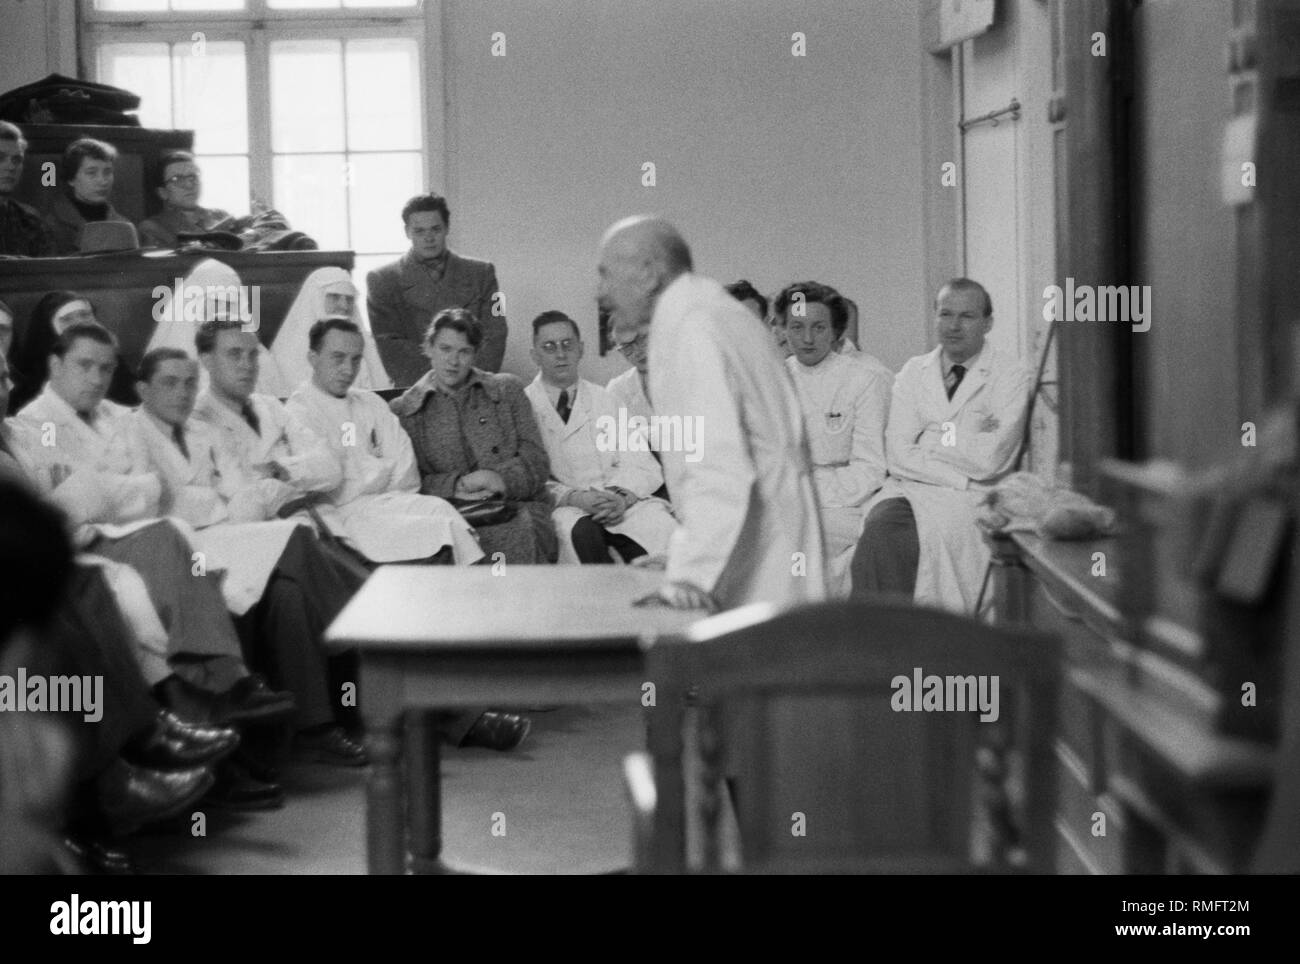 Privy Council Professor med. Carl Wessely giving his farewell lecture shortly before his death in the eye clinic at Pettenkoferstrasse, Munich. He was chairman of the Deutsche Ophthalmologische Gesellschaft and founder of the Vereinigung Bayerischer Augenaerzte (Association of Bavarian Ophthalmologists). Behind, physician colleagues and in front of the students also two nuns of the 'Kongregation der Schwestern des Allerheiligsten Erloesers' ('Congregation of the Sisters of the Most Holy Redeemer'). Stock Photo